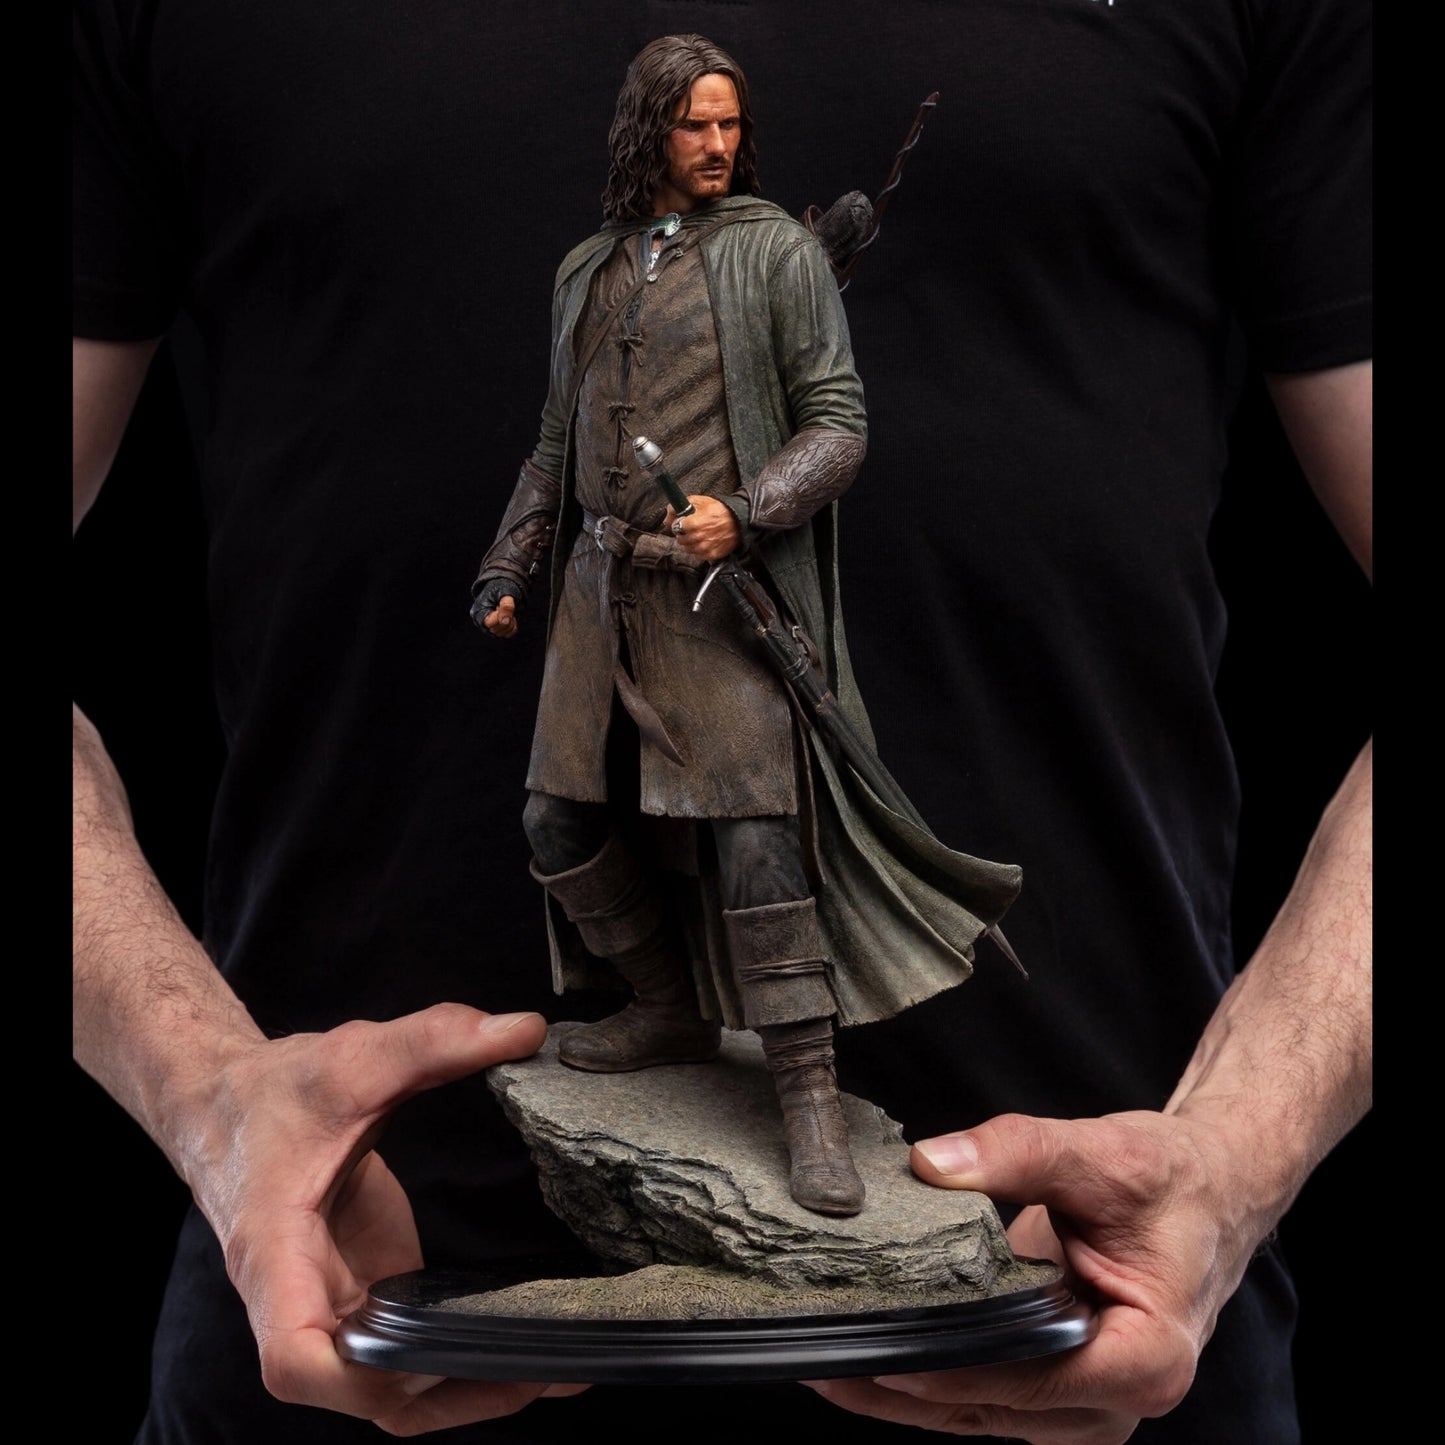 Load image into Gallery viewer, Aragorn (Hunter of the Plains) Lord of the Rings Statue by Weta Workshop
